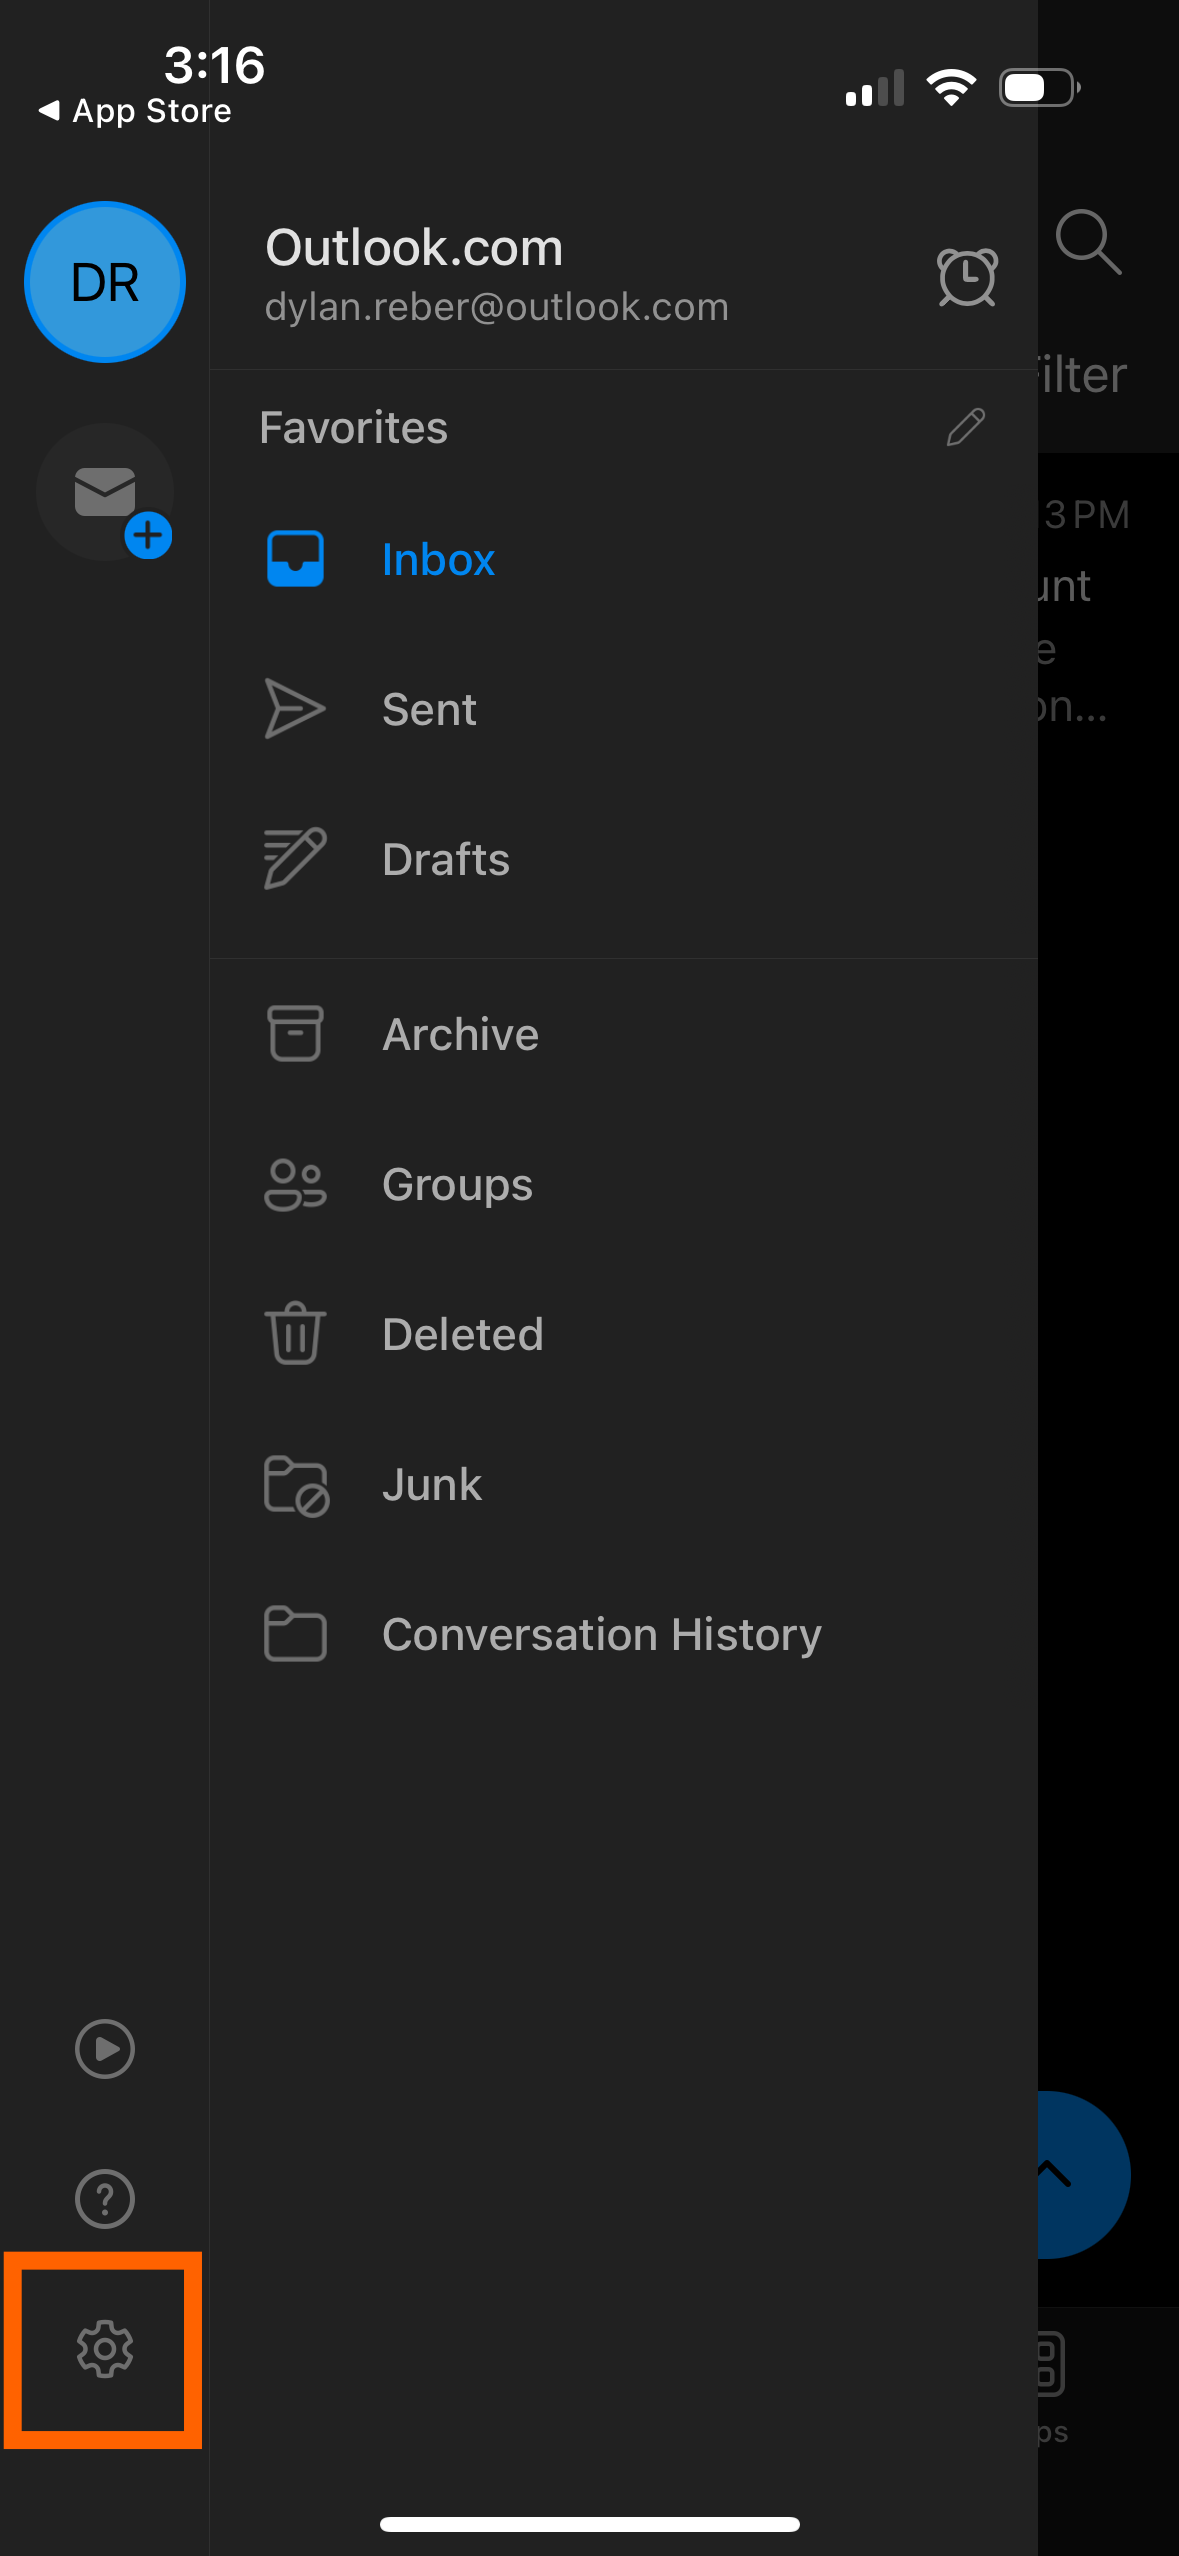 Screenshot of where to find the settings menu in the Outlook app